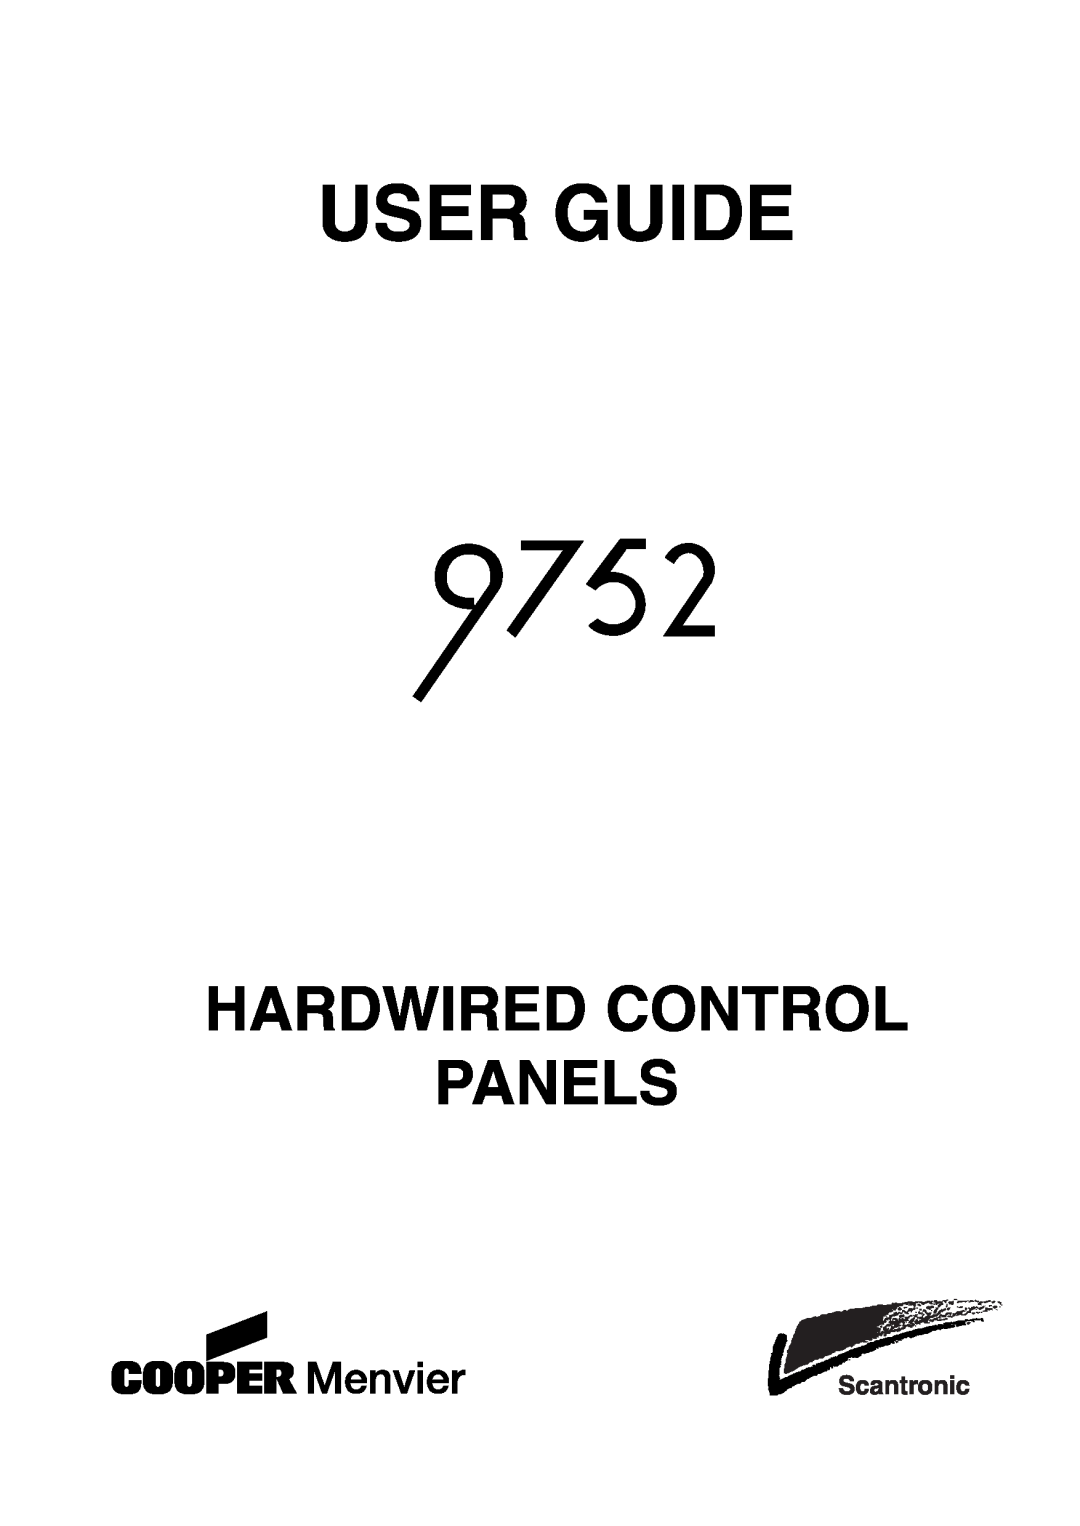 Cooper Bussmann 9752 manual Hardwired Control Panels, User Guide 